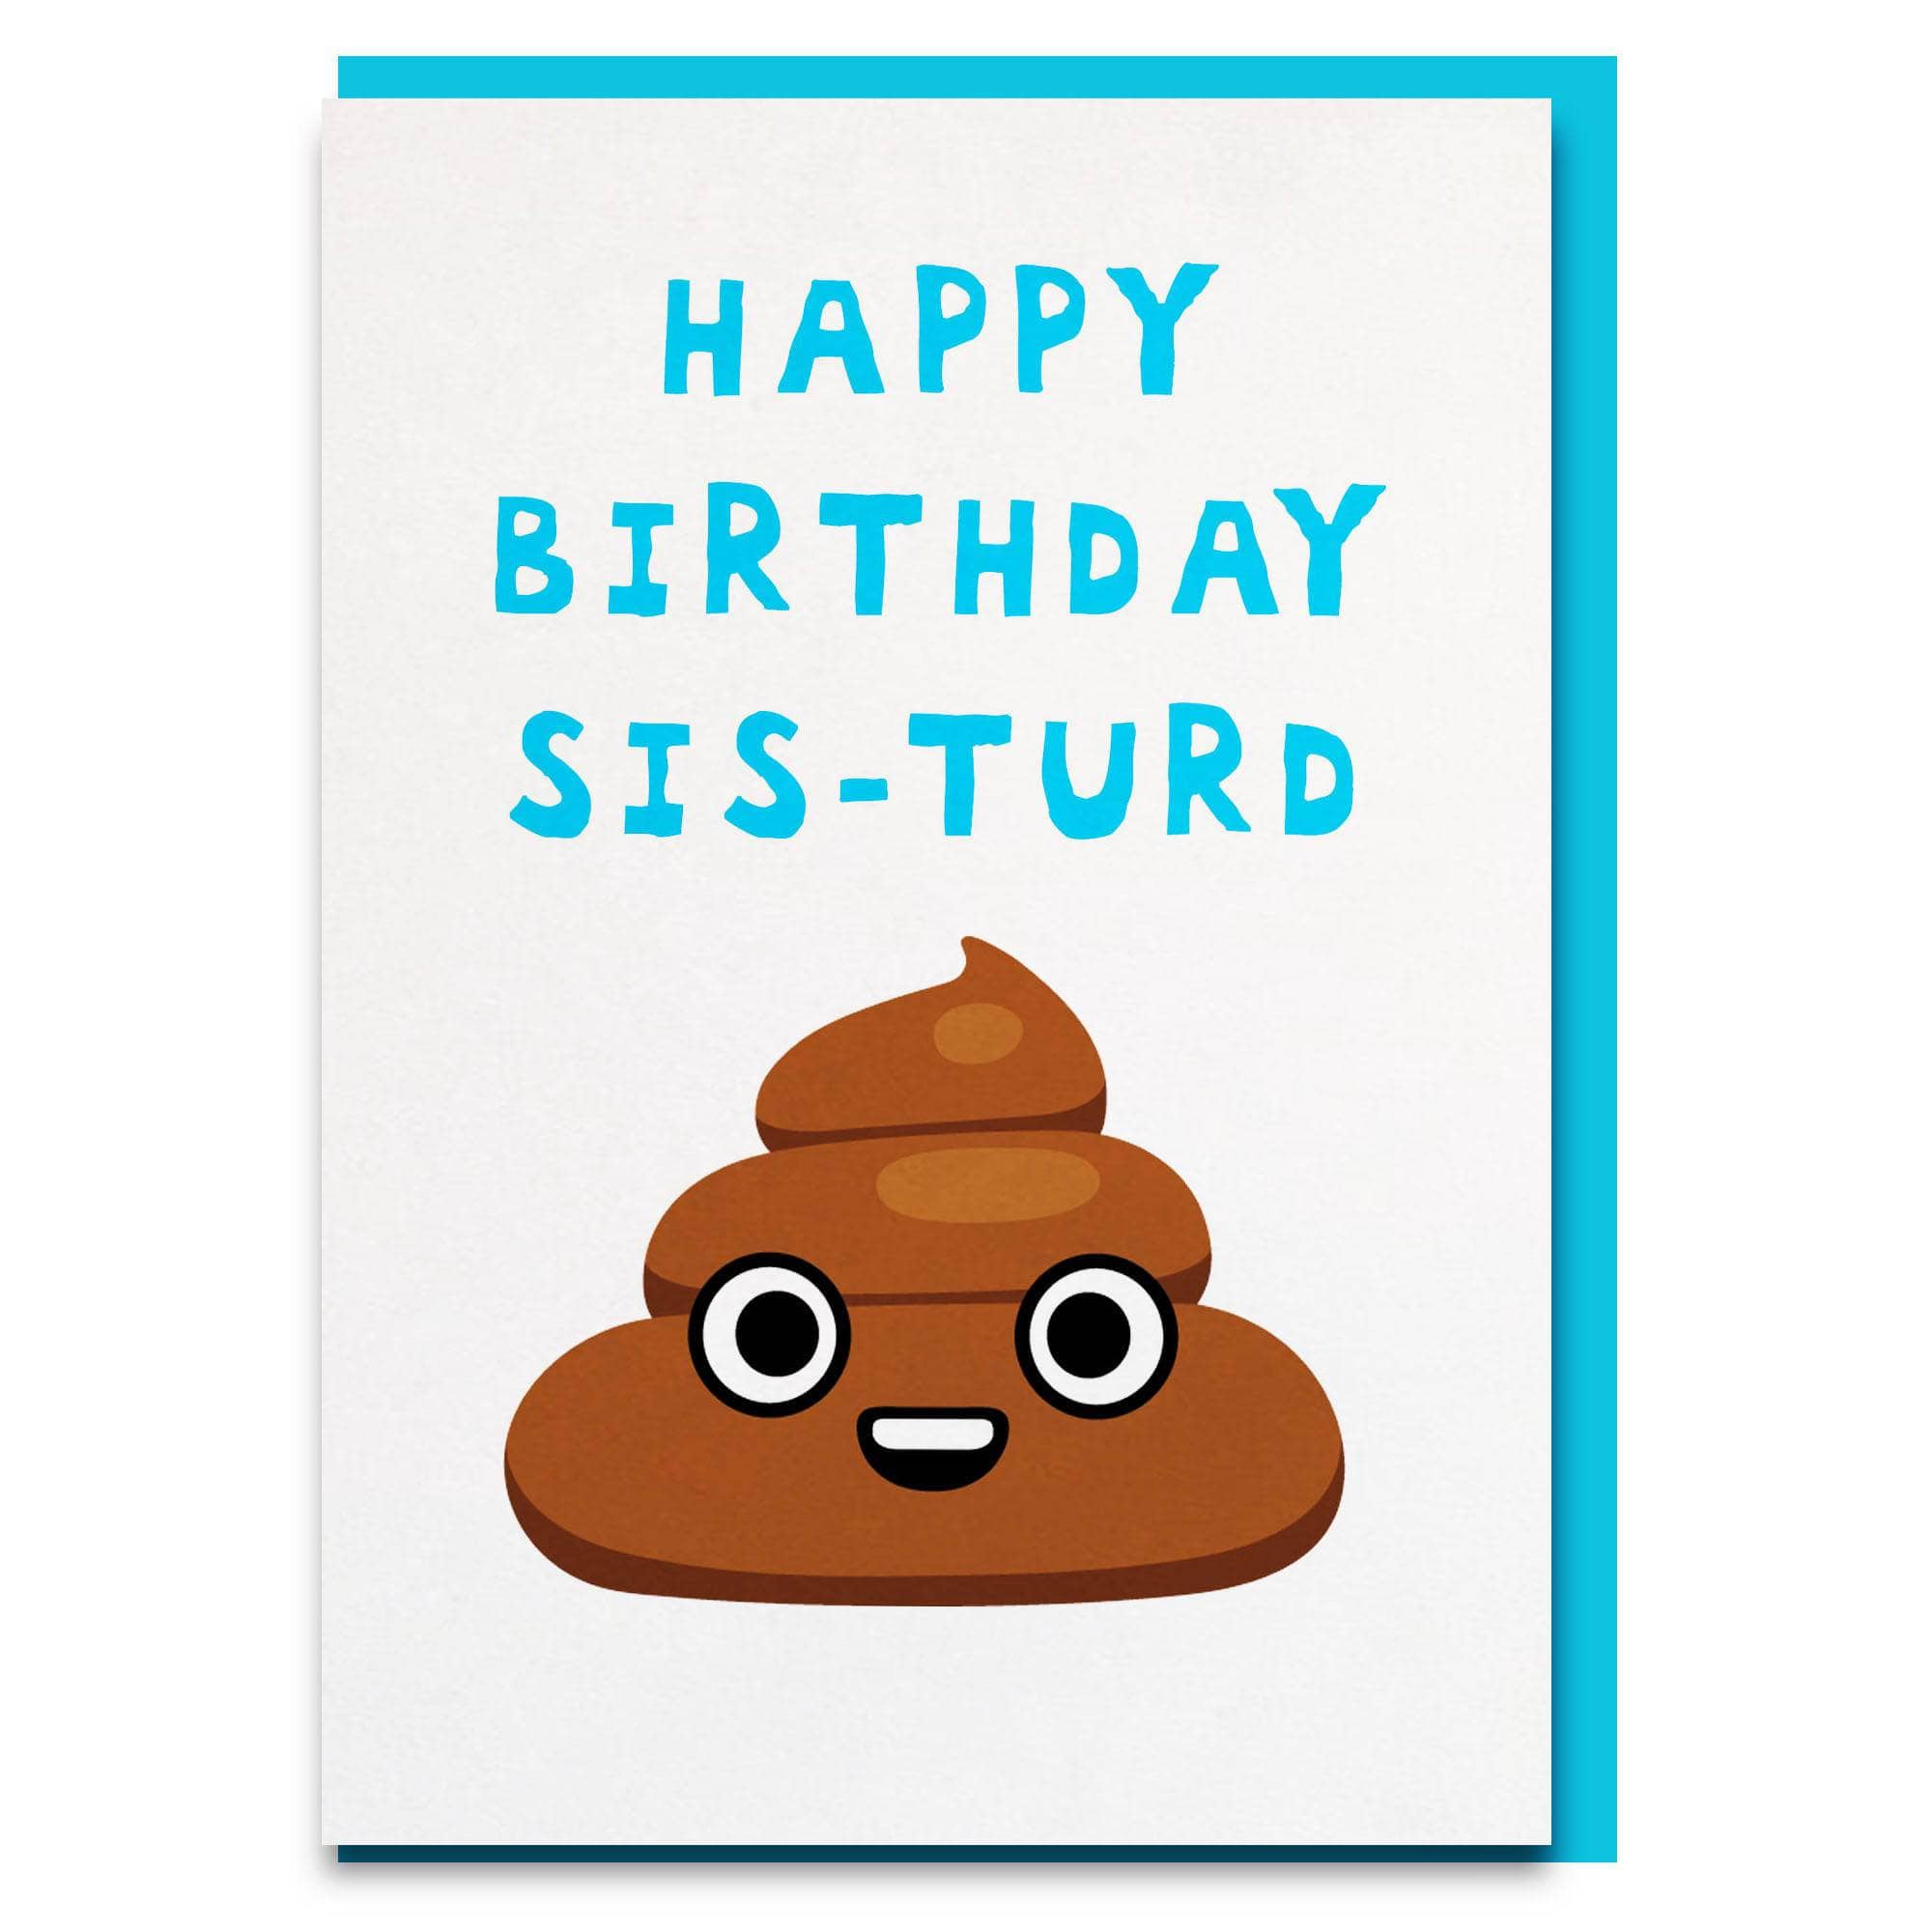 Funny sis-turd birthday card for sister!